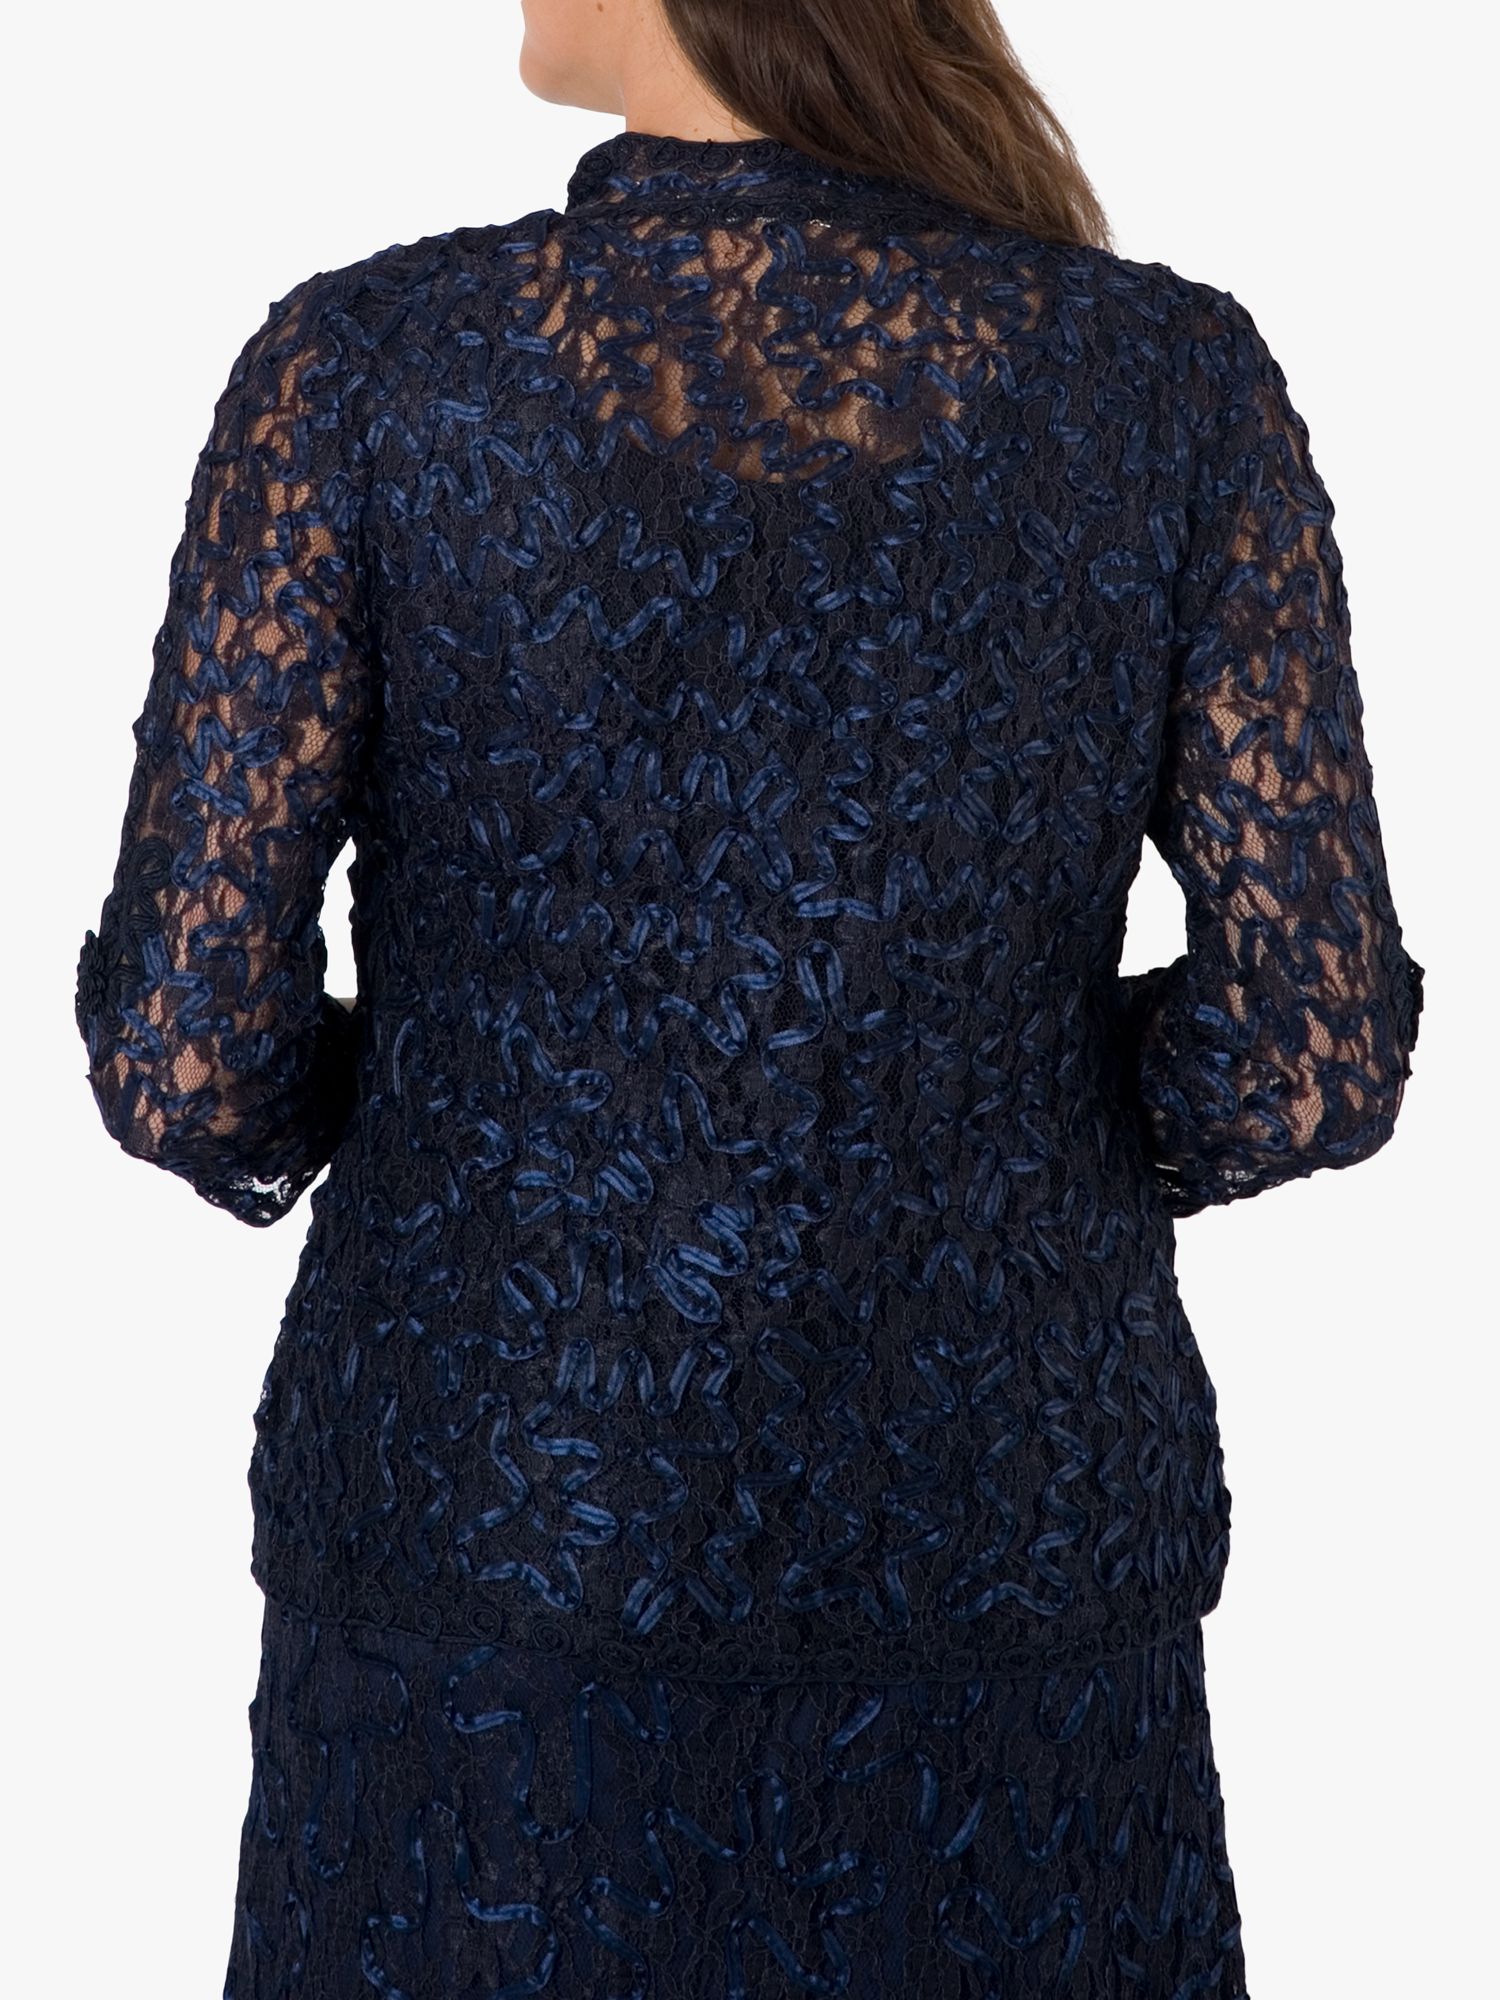 Buy chesca Cornelli Lace Jacket Online at johnlewis.com